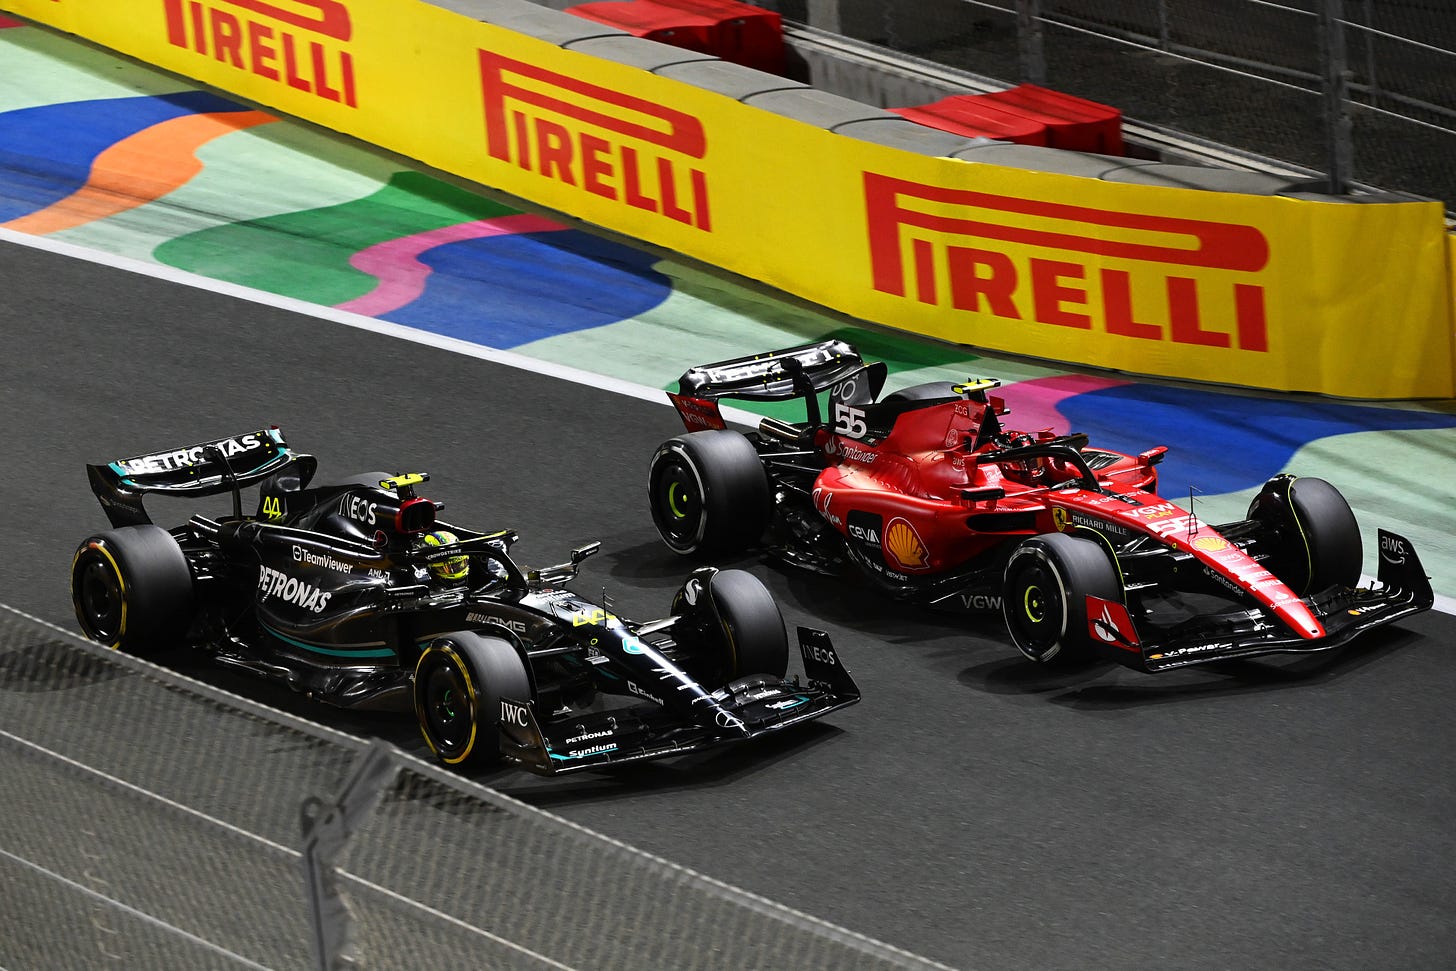 Innovation or imitation? Ferrari and Mercedes hold steady against Red Bull